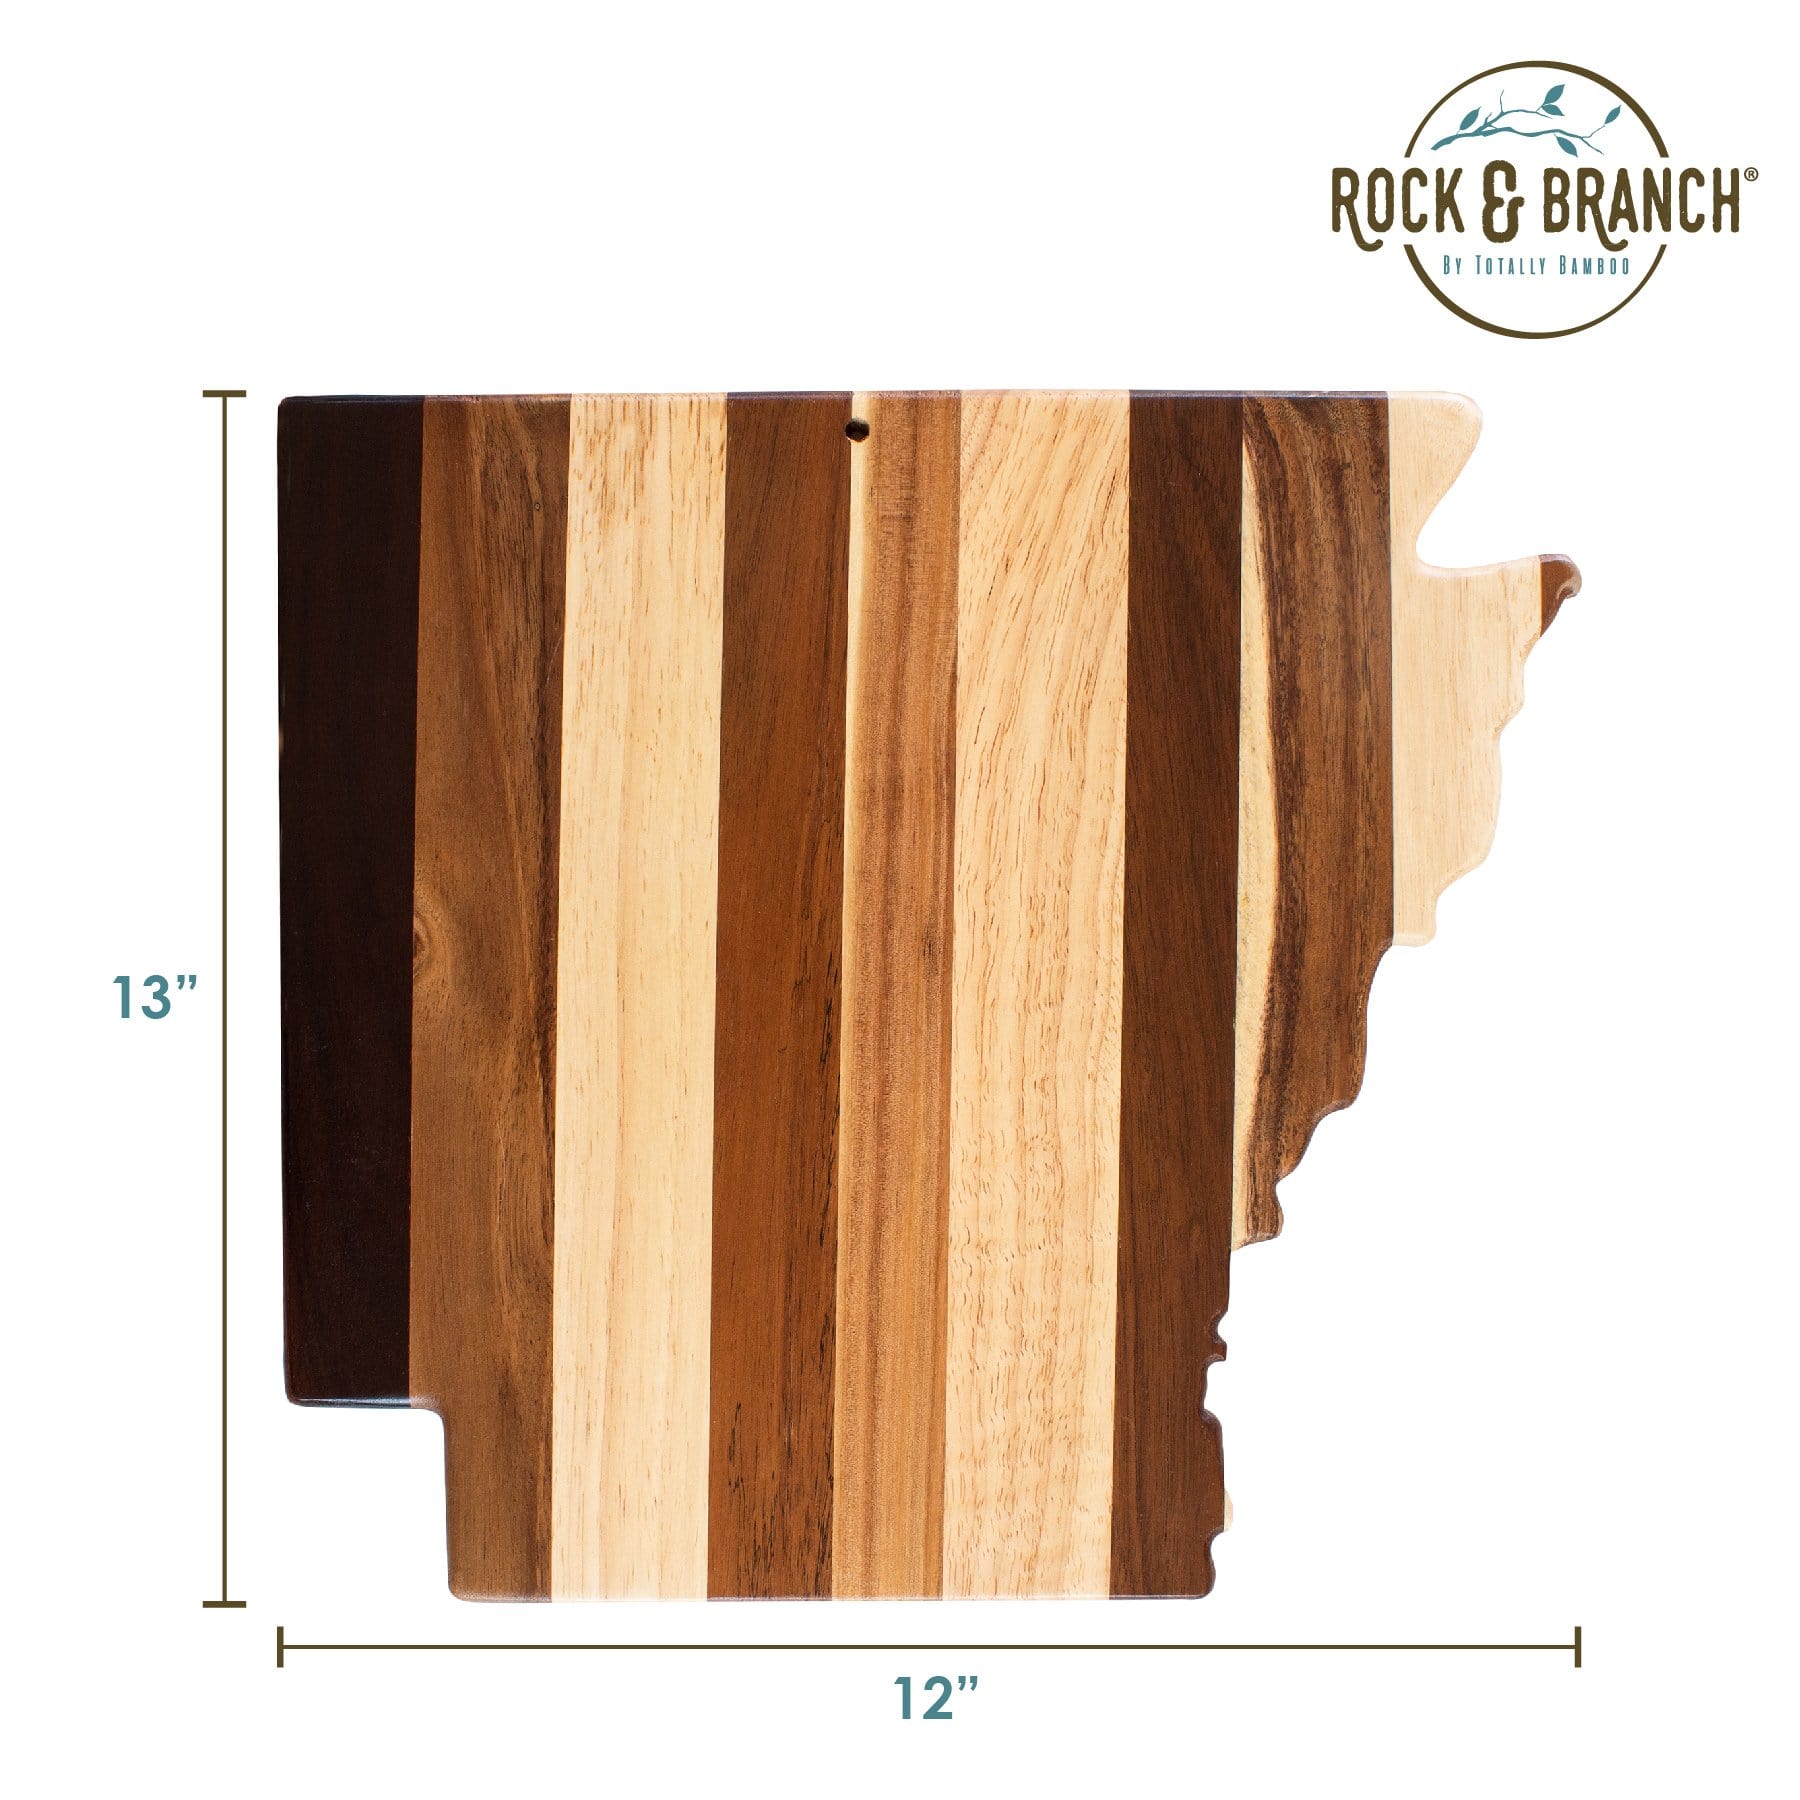 Totally Bamboo Rock & Branch® Shiplap Series Arkansas State Shaped Wood Serving and Cutting Board